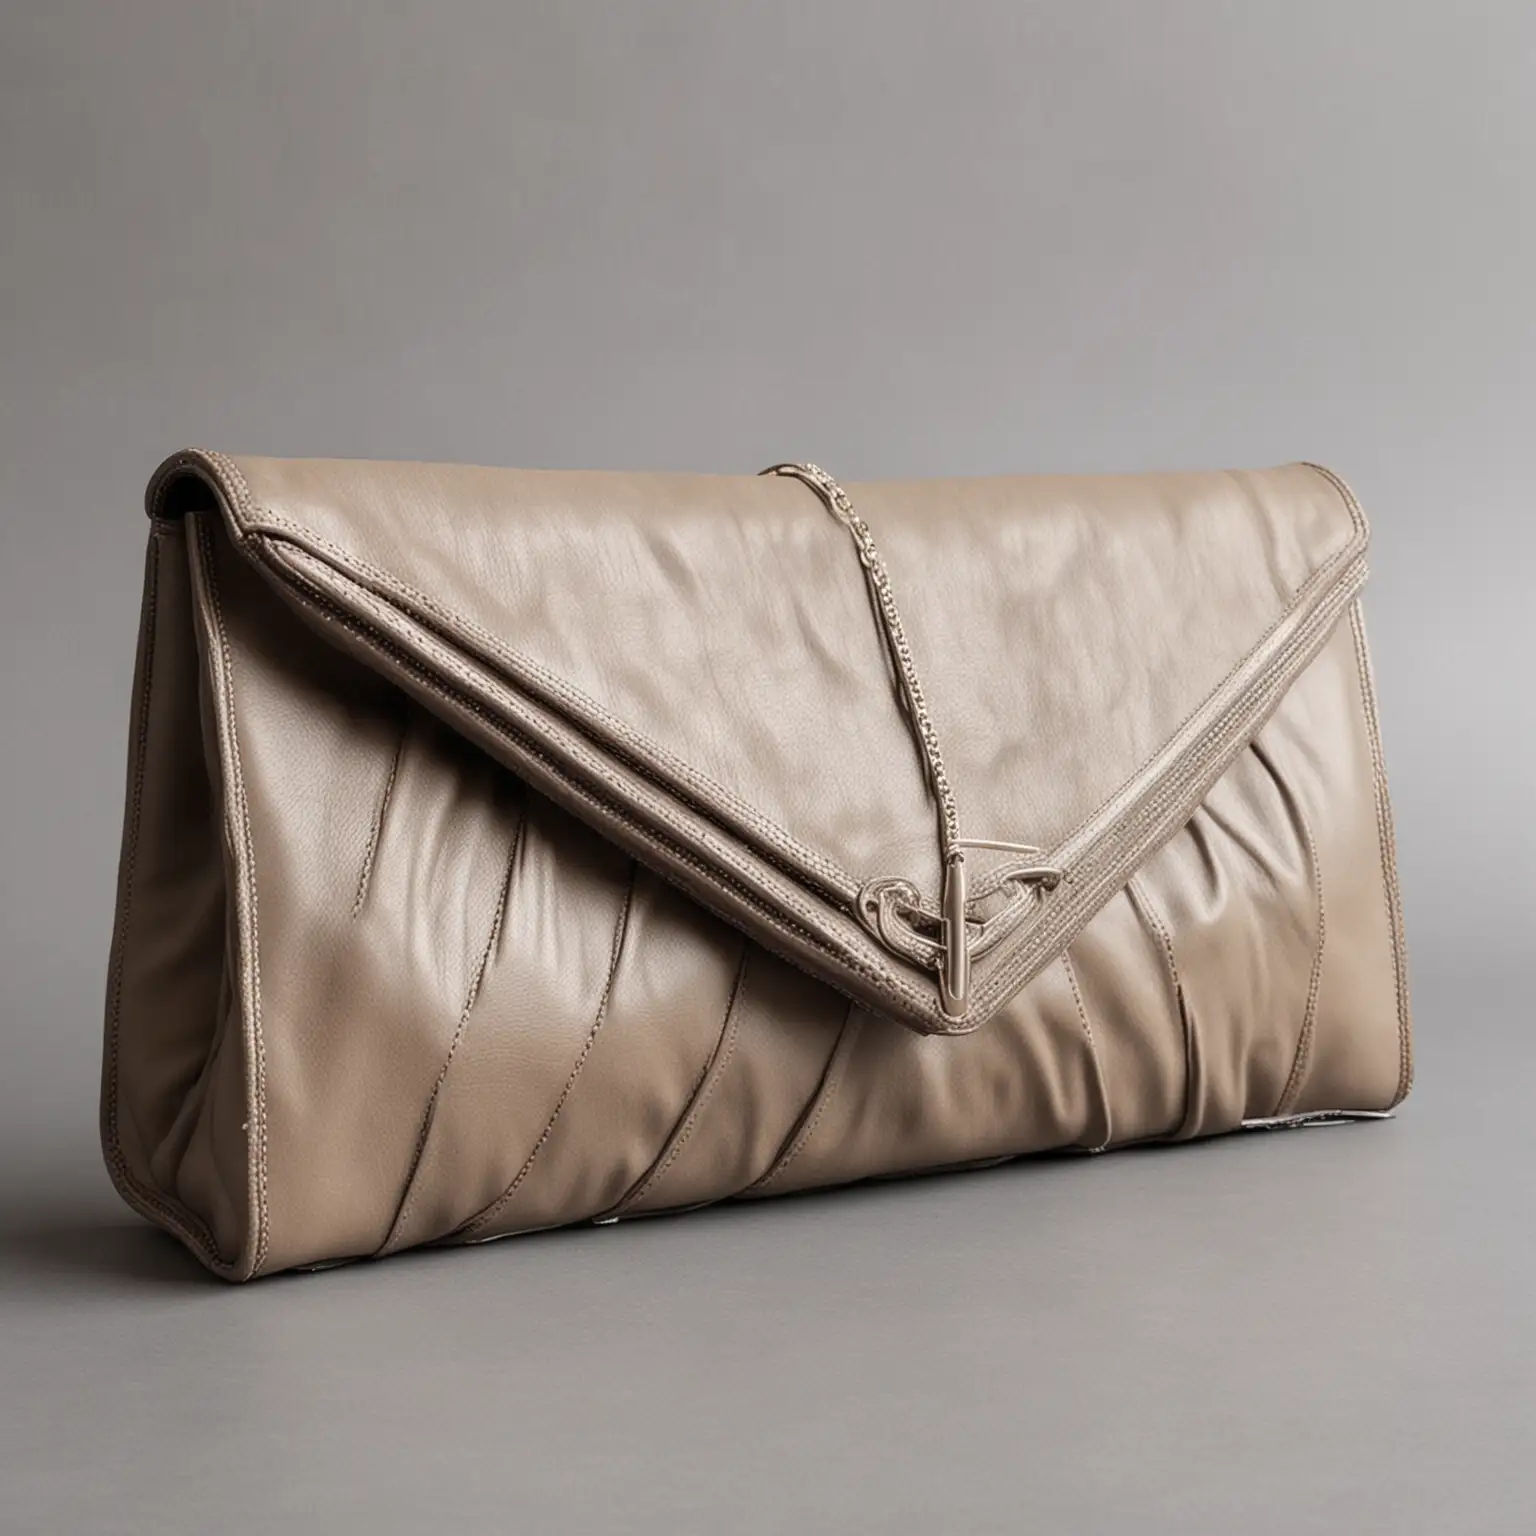 stunning clutch bag gray taupe, glam, hyper-realistic,  Garbage style